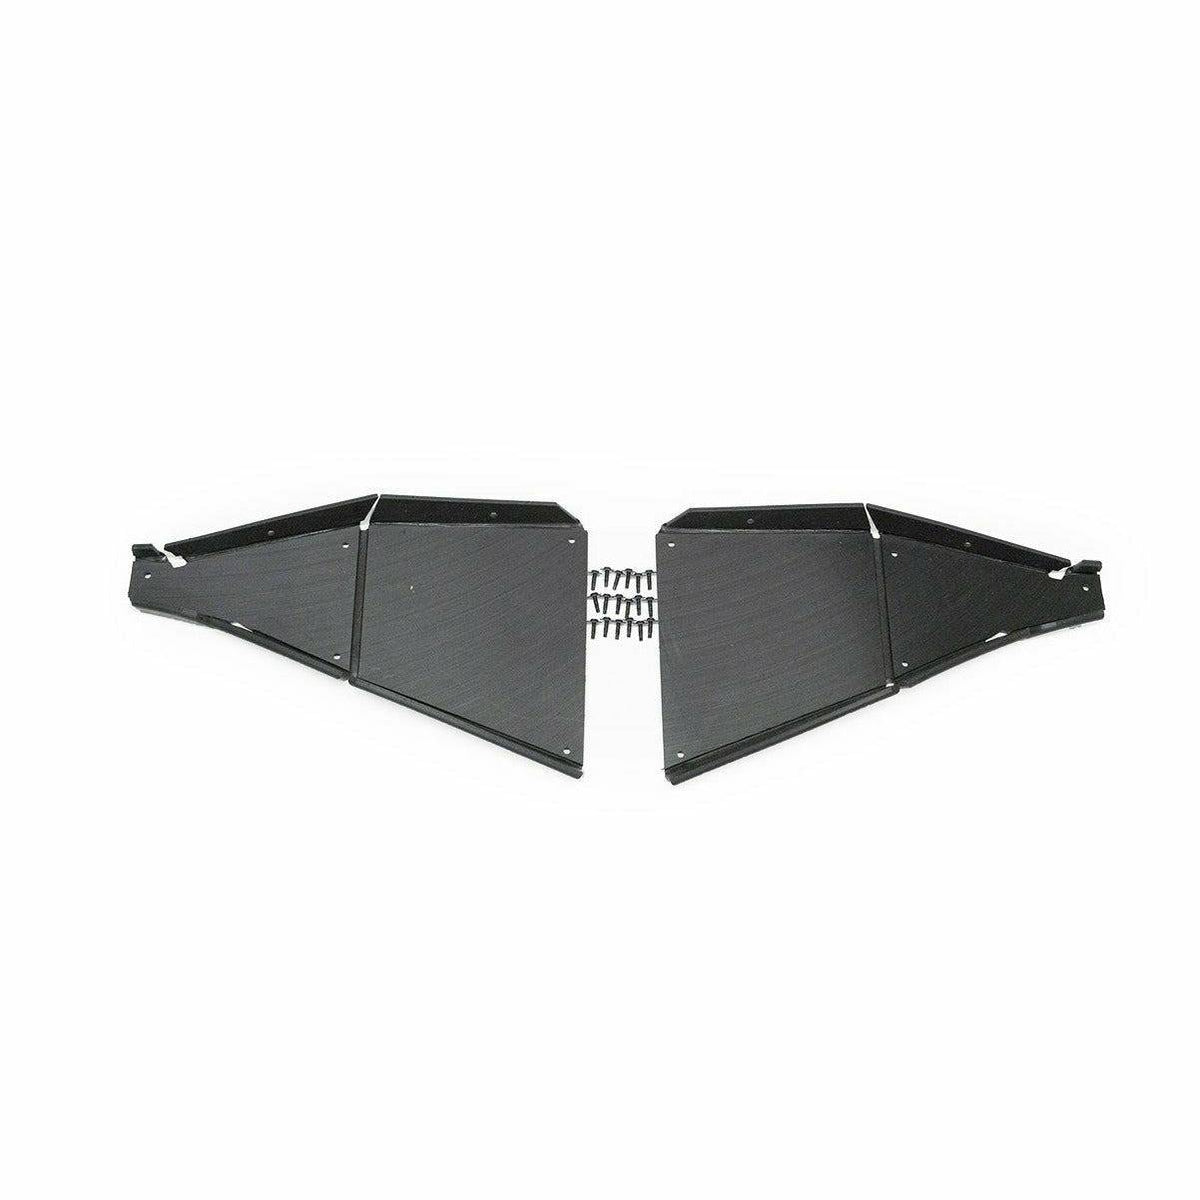 HCR Polaris RZR Turbo S Skid Plates (Front A-Arms Only)